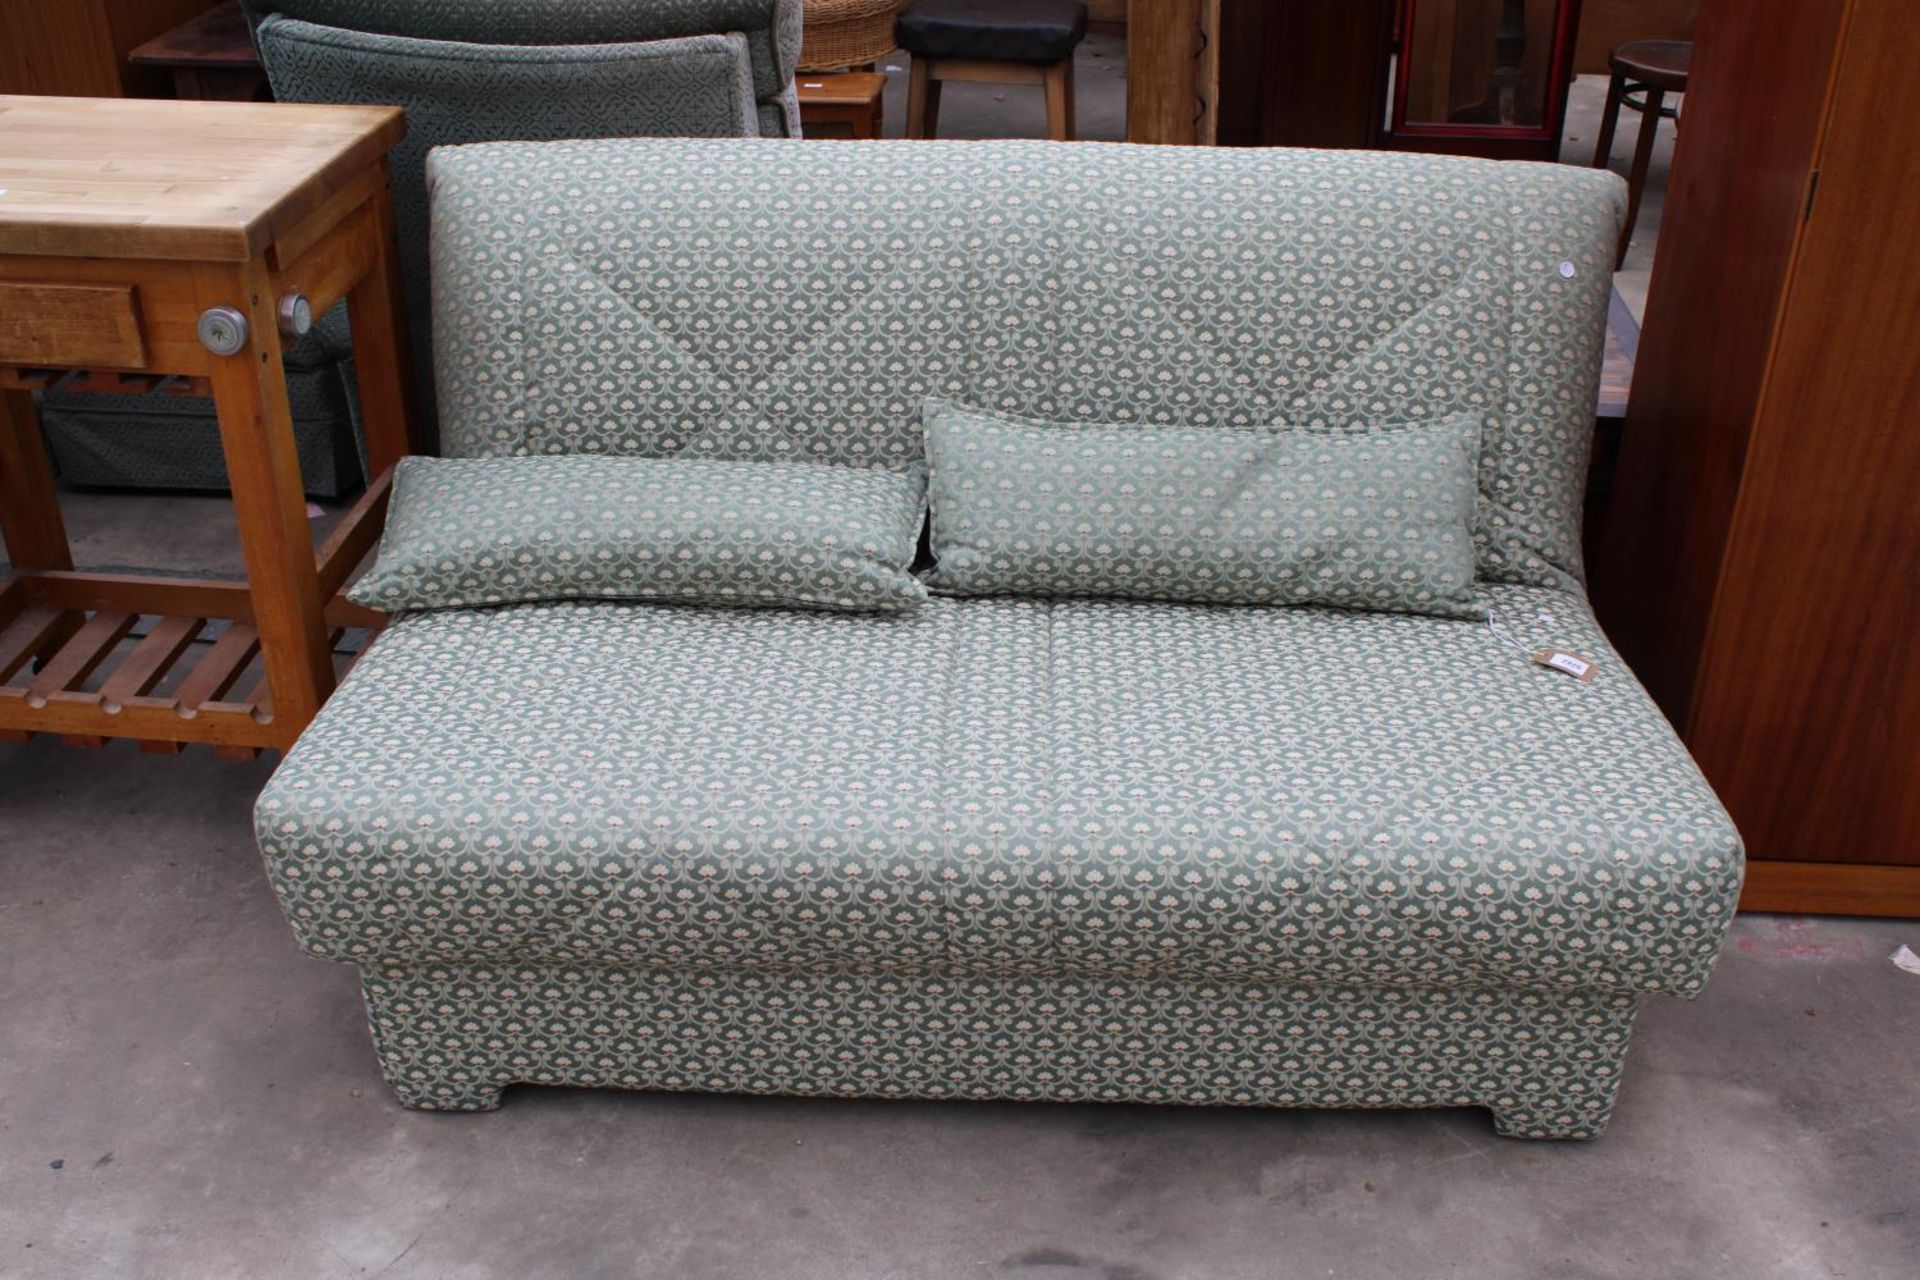 A MODERN GREEN FLORAL BED SETTEE